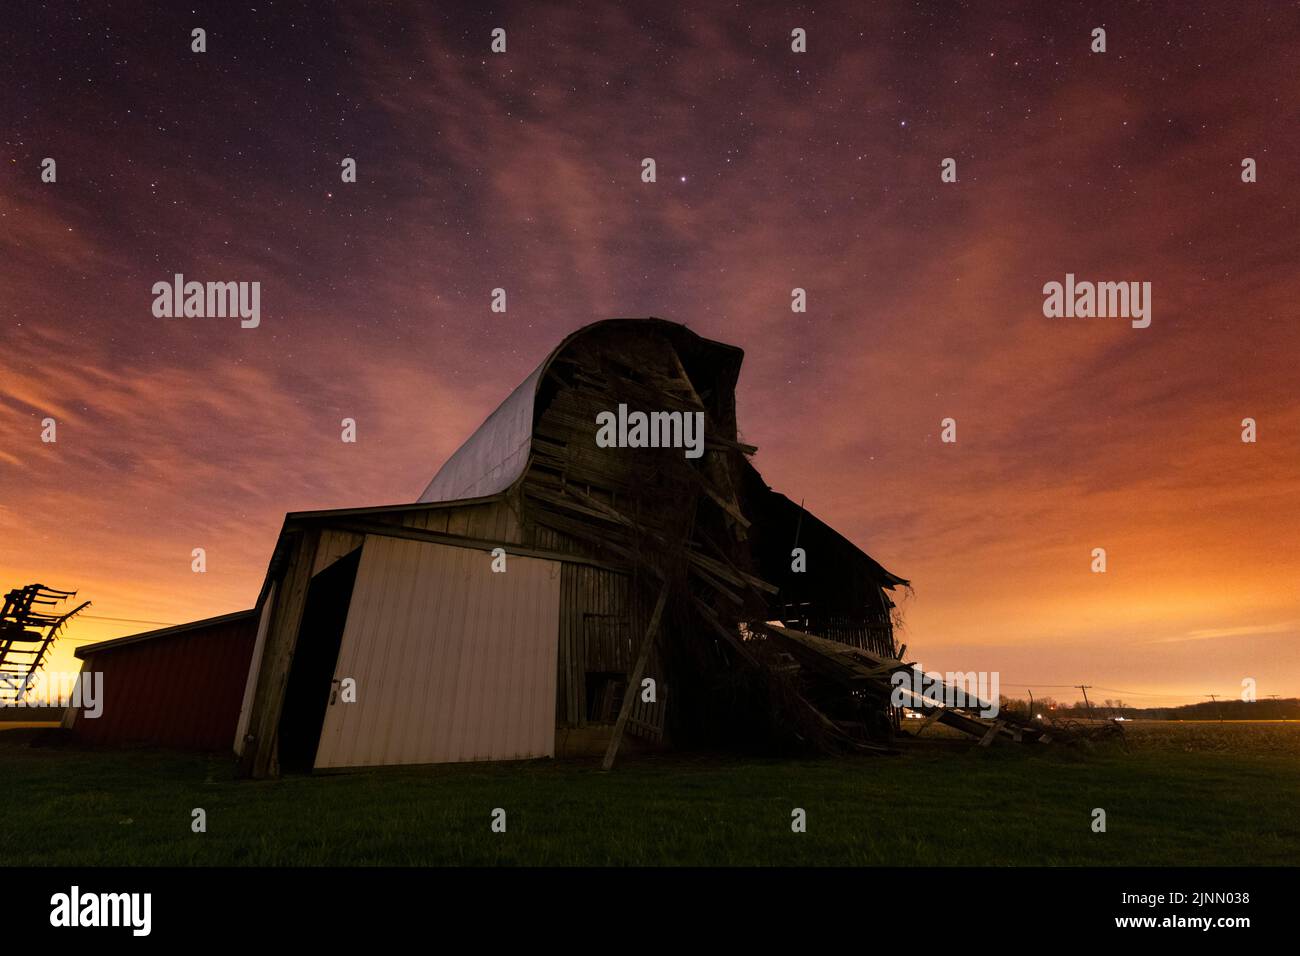 An old round top red barn that is falling apart continues to decline under the stars and clouds of an approaching weather system.  Taken in Indiana. Stock Photo